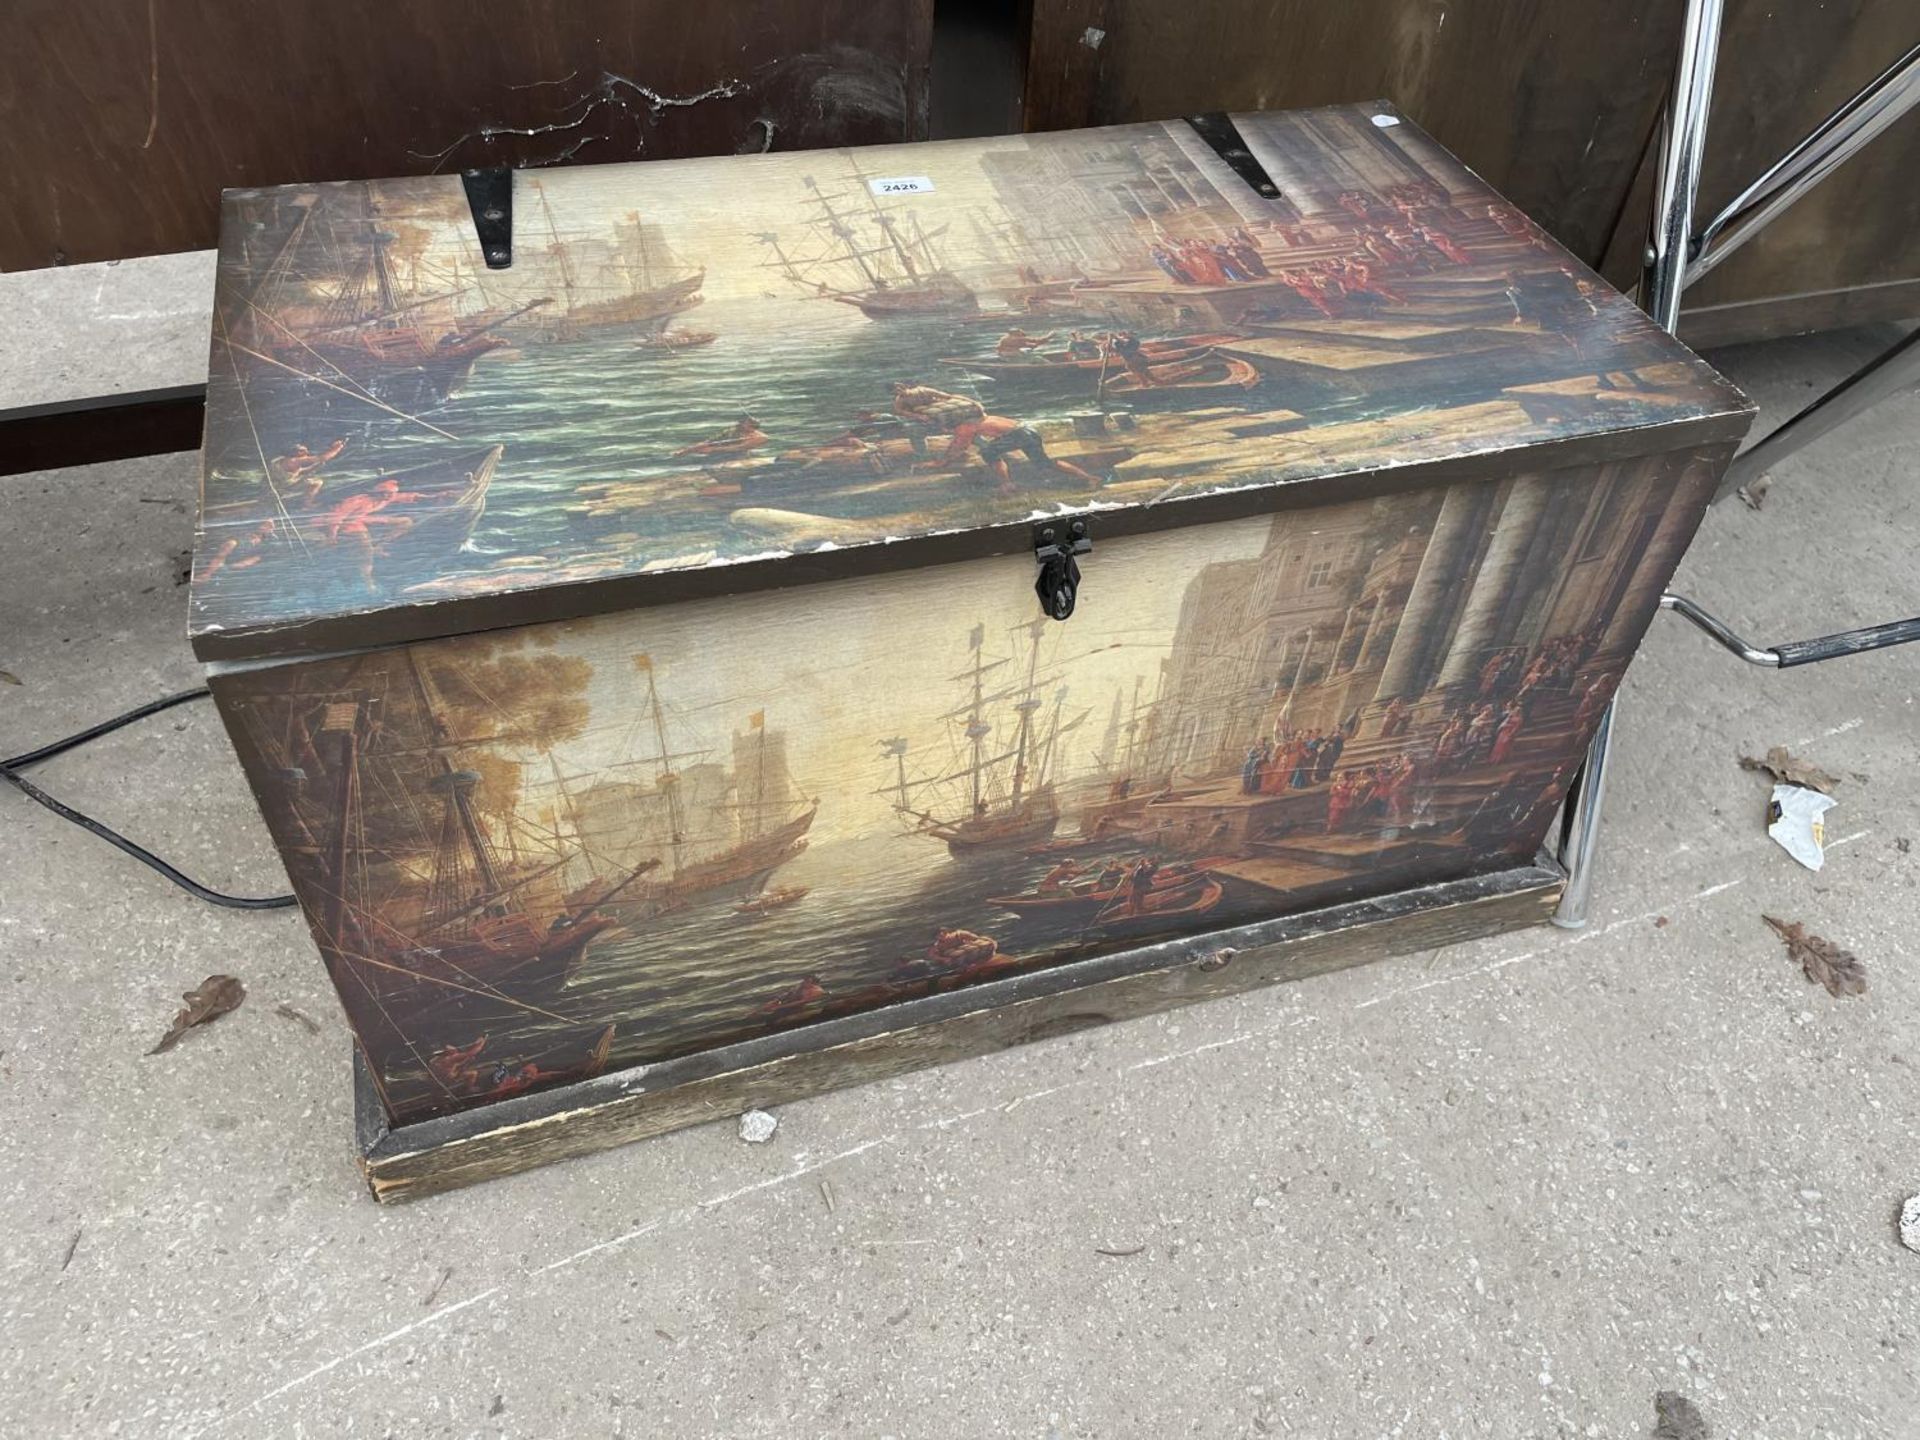 A MODERN TRUNK DEPICTING MASTED SHIPS